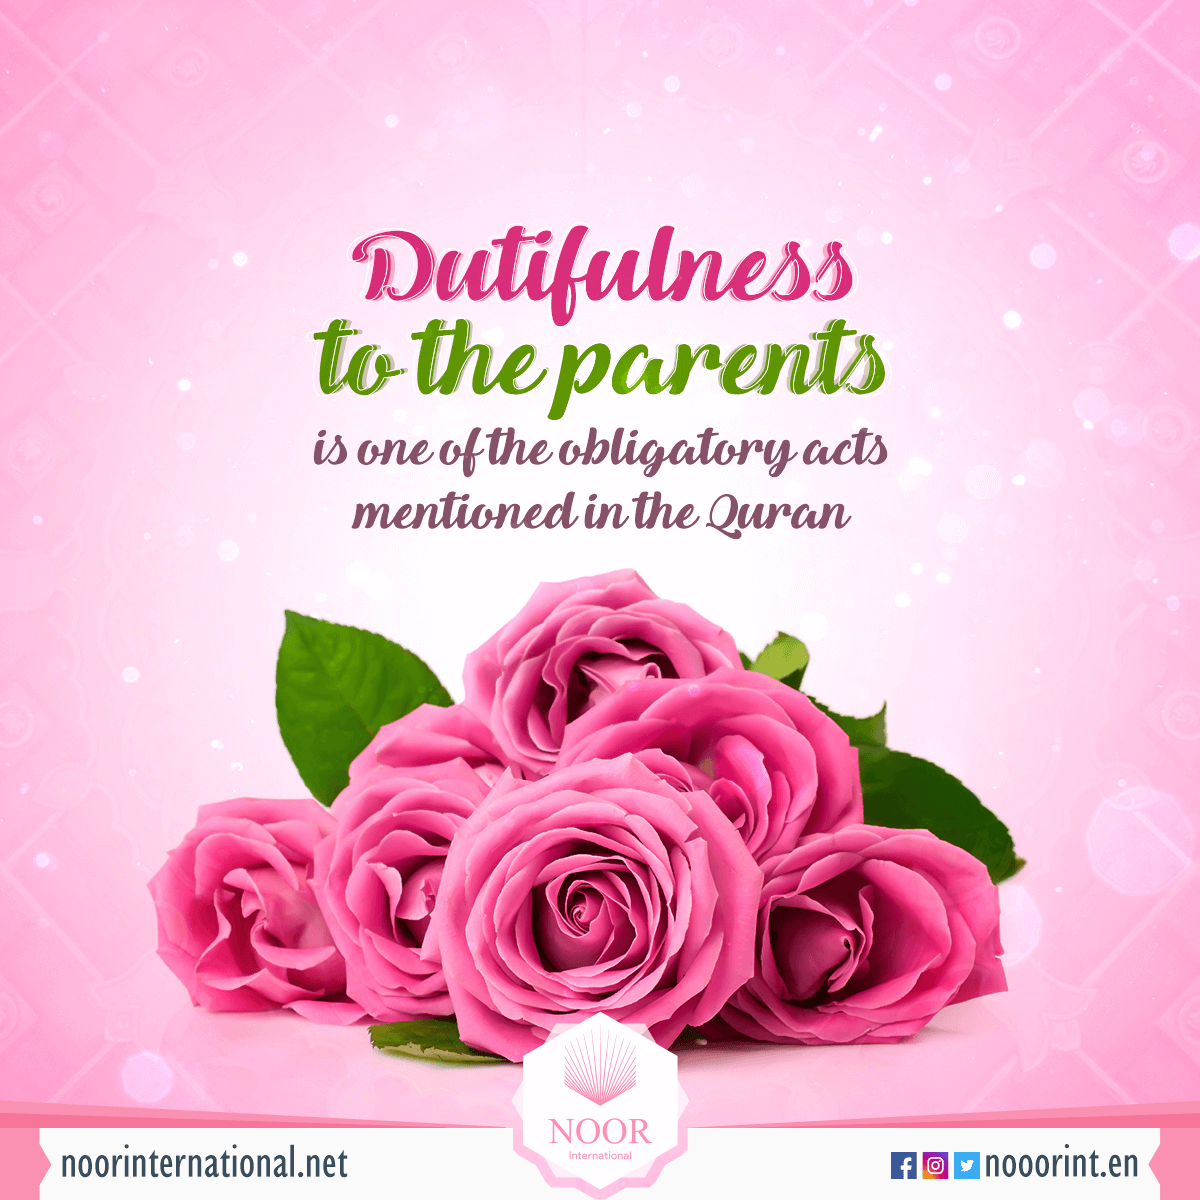 Dutifulness to the parents is one of the obligatory acts mentioned in the Quran